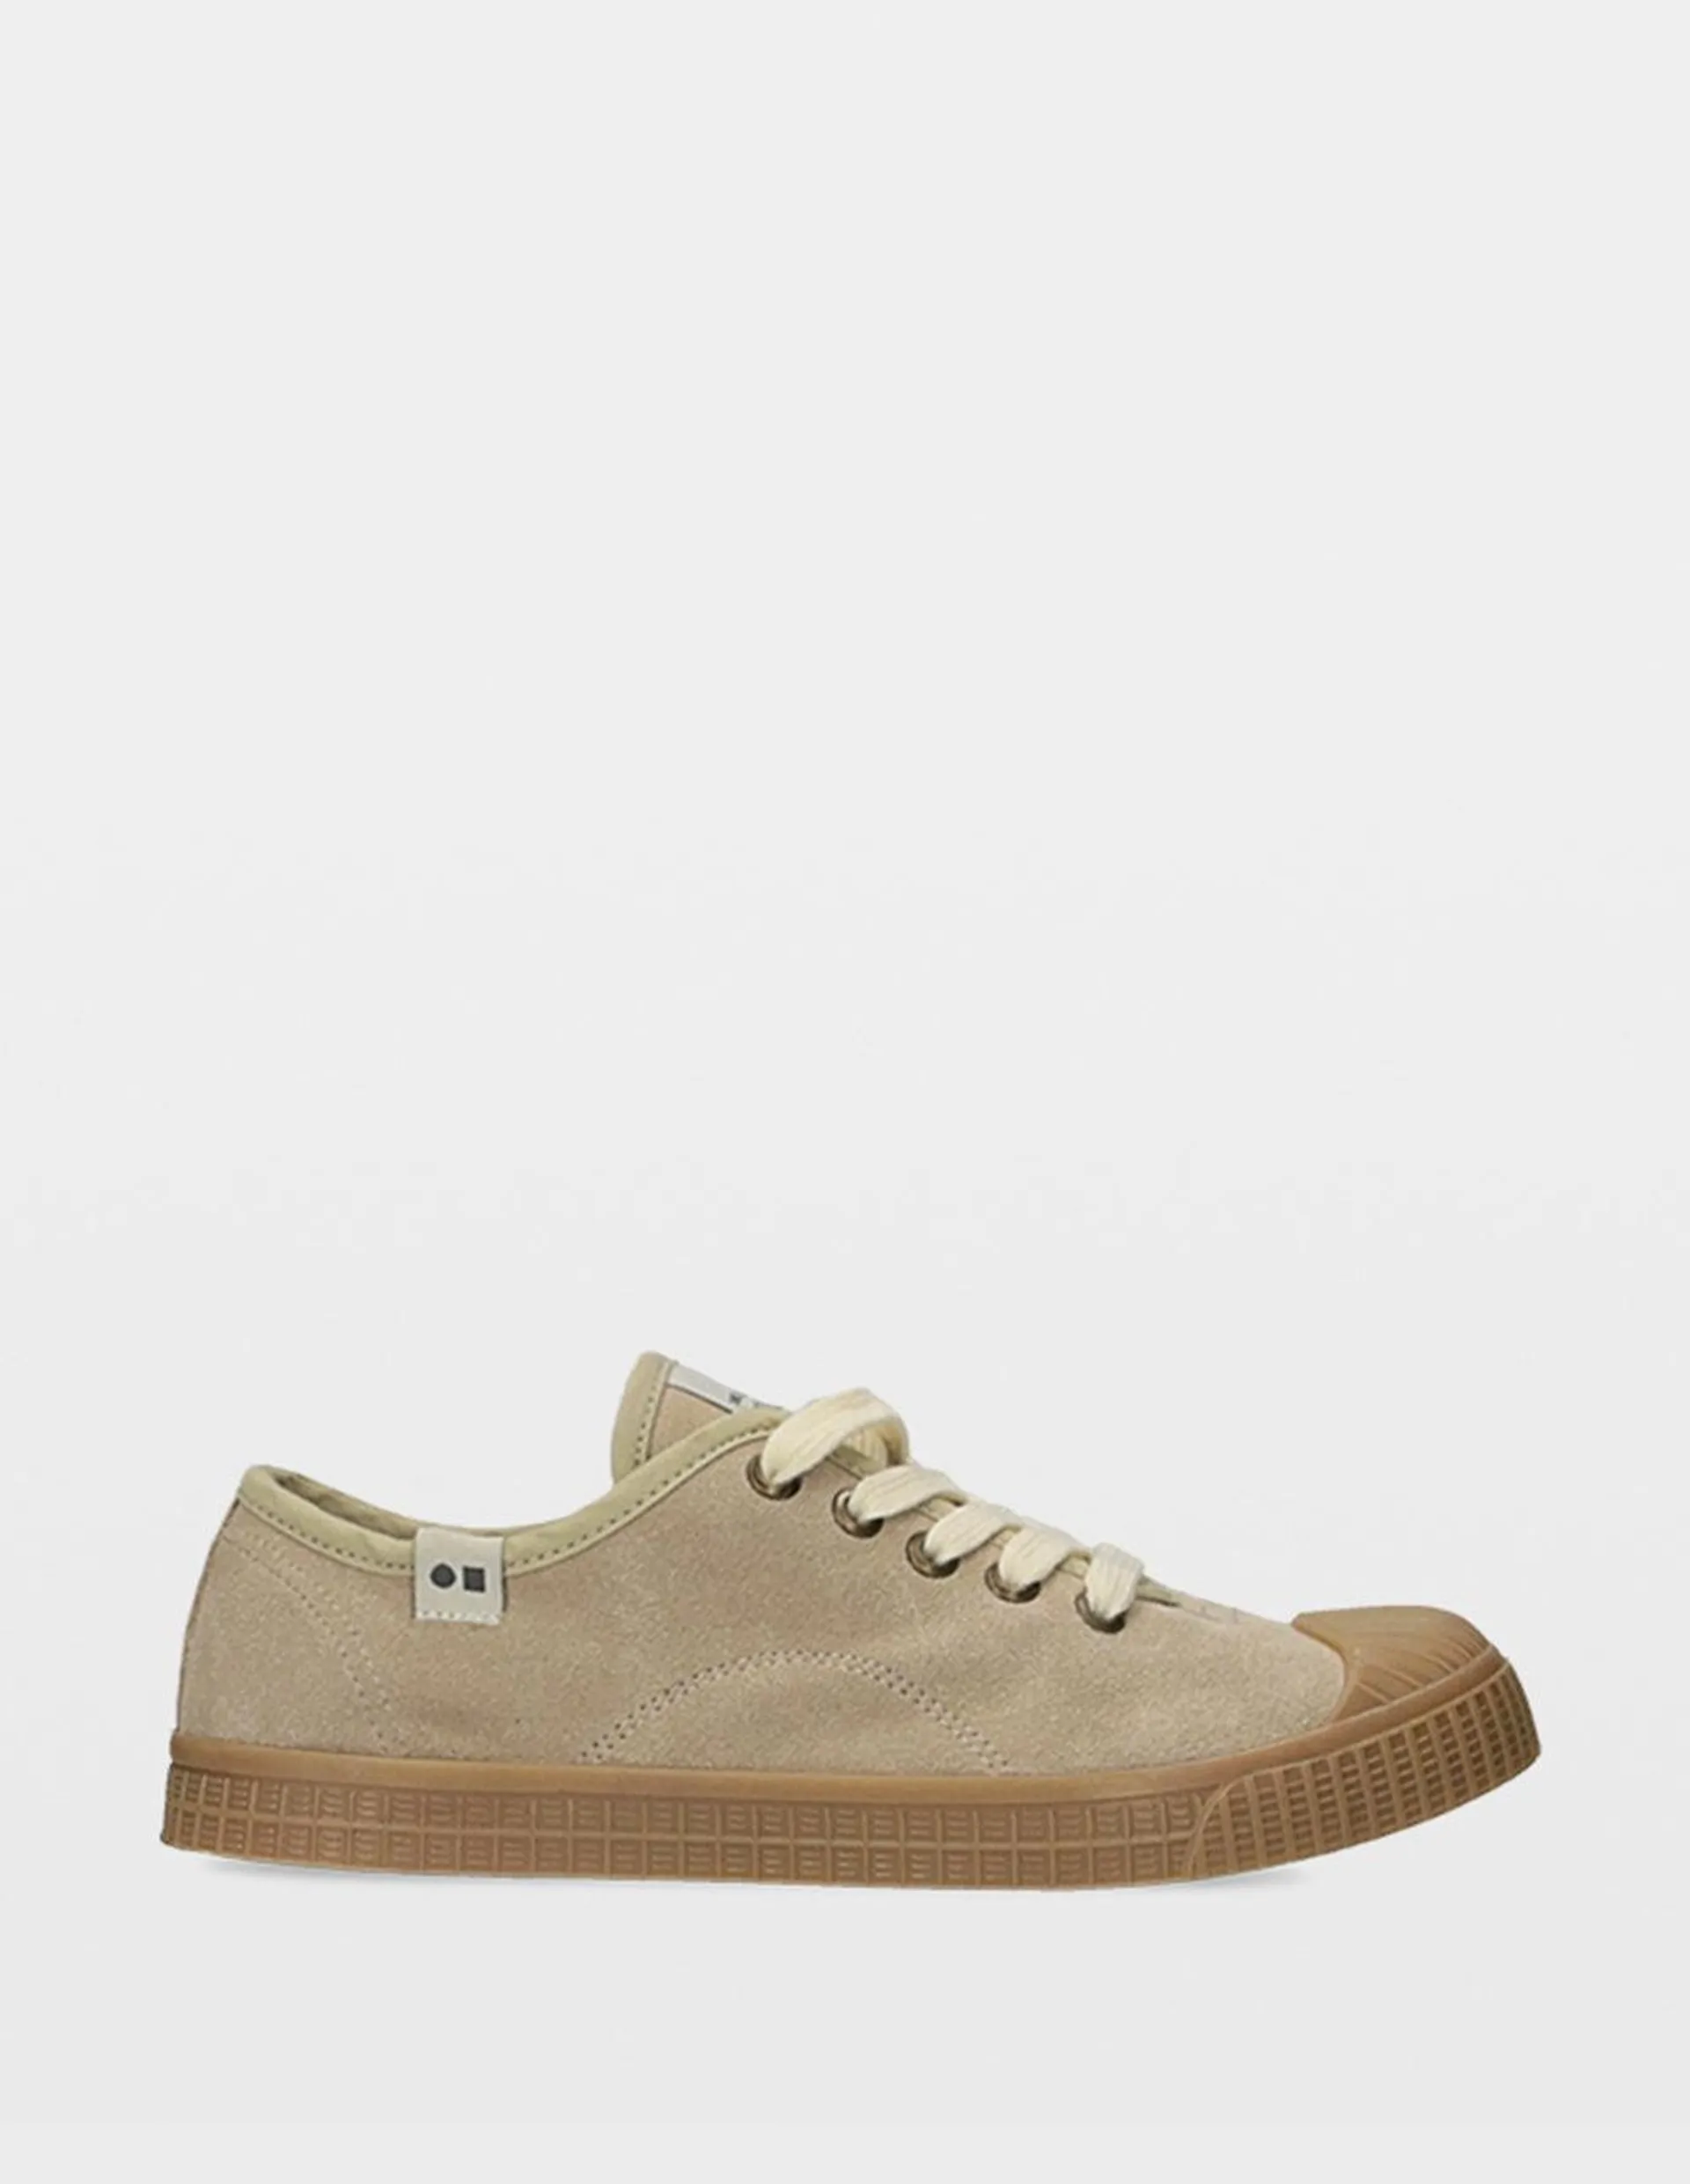 GREENDAY BEIGE LEATHER MUJER